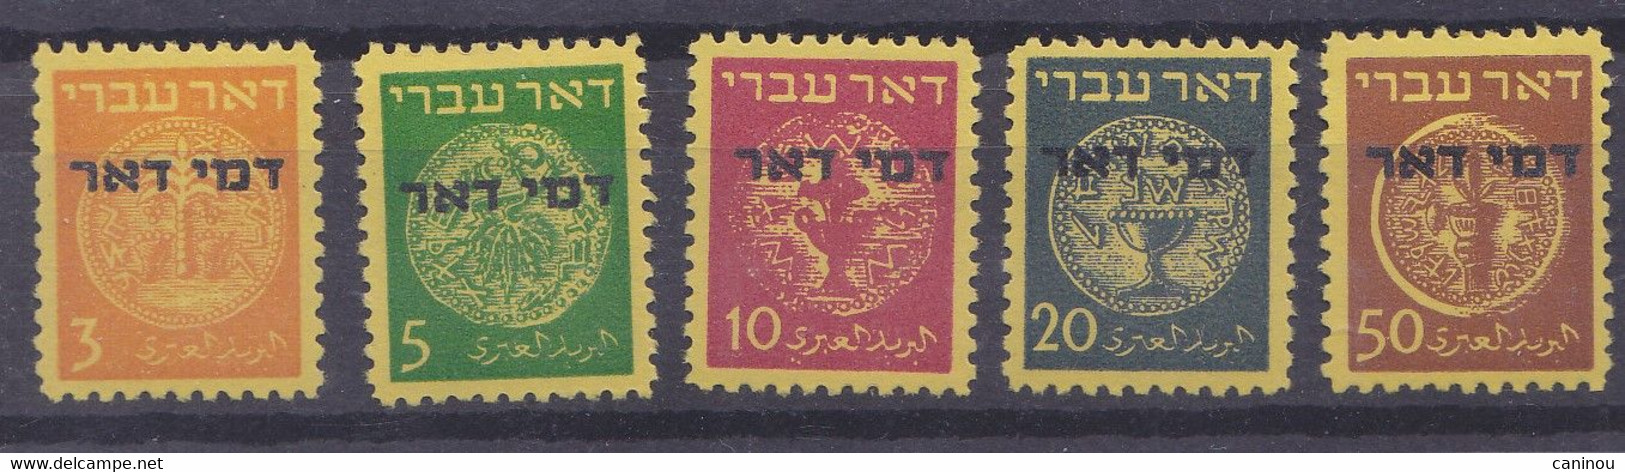 ISRAEL TIMBRES TAXE 1948 Y & T 1-5 MONNAIES ANCIENNES NEUFS TRACES CHARNIERES - Portomarken